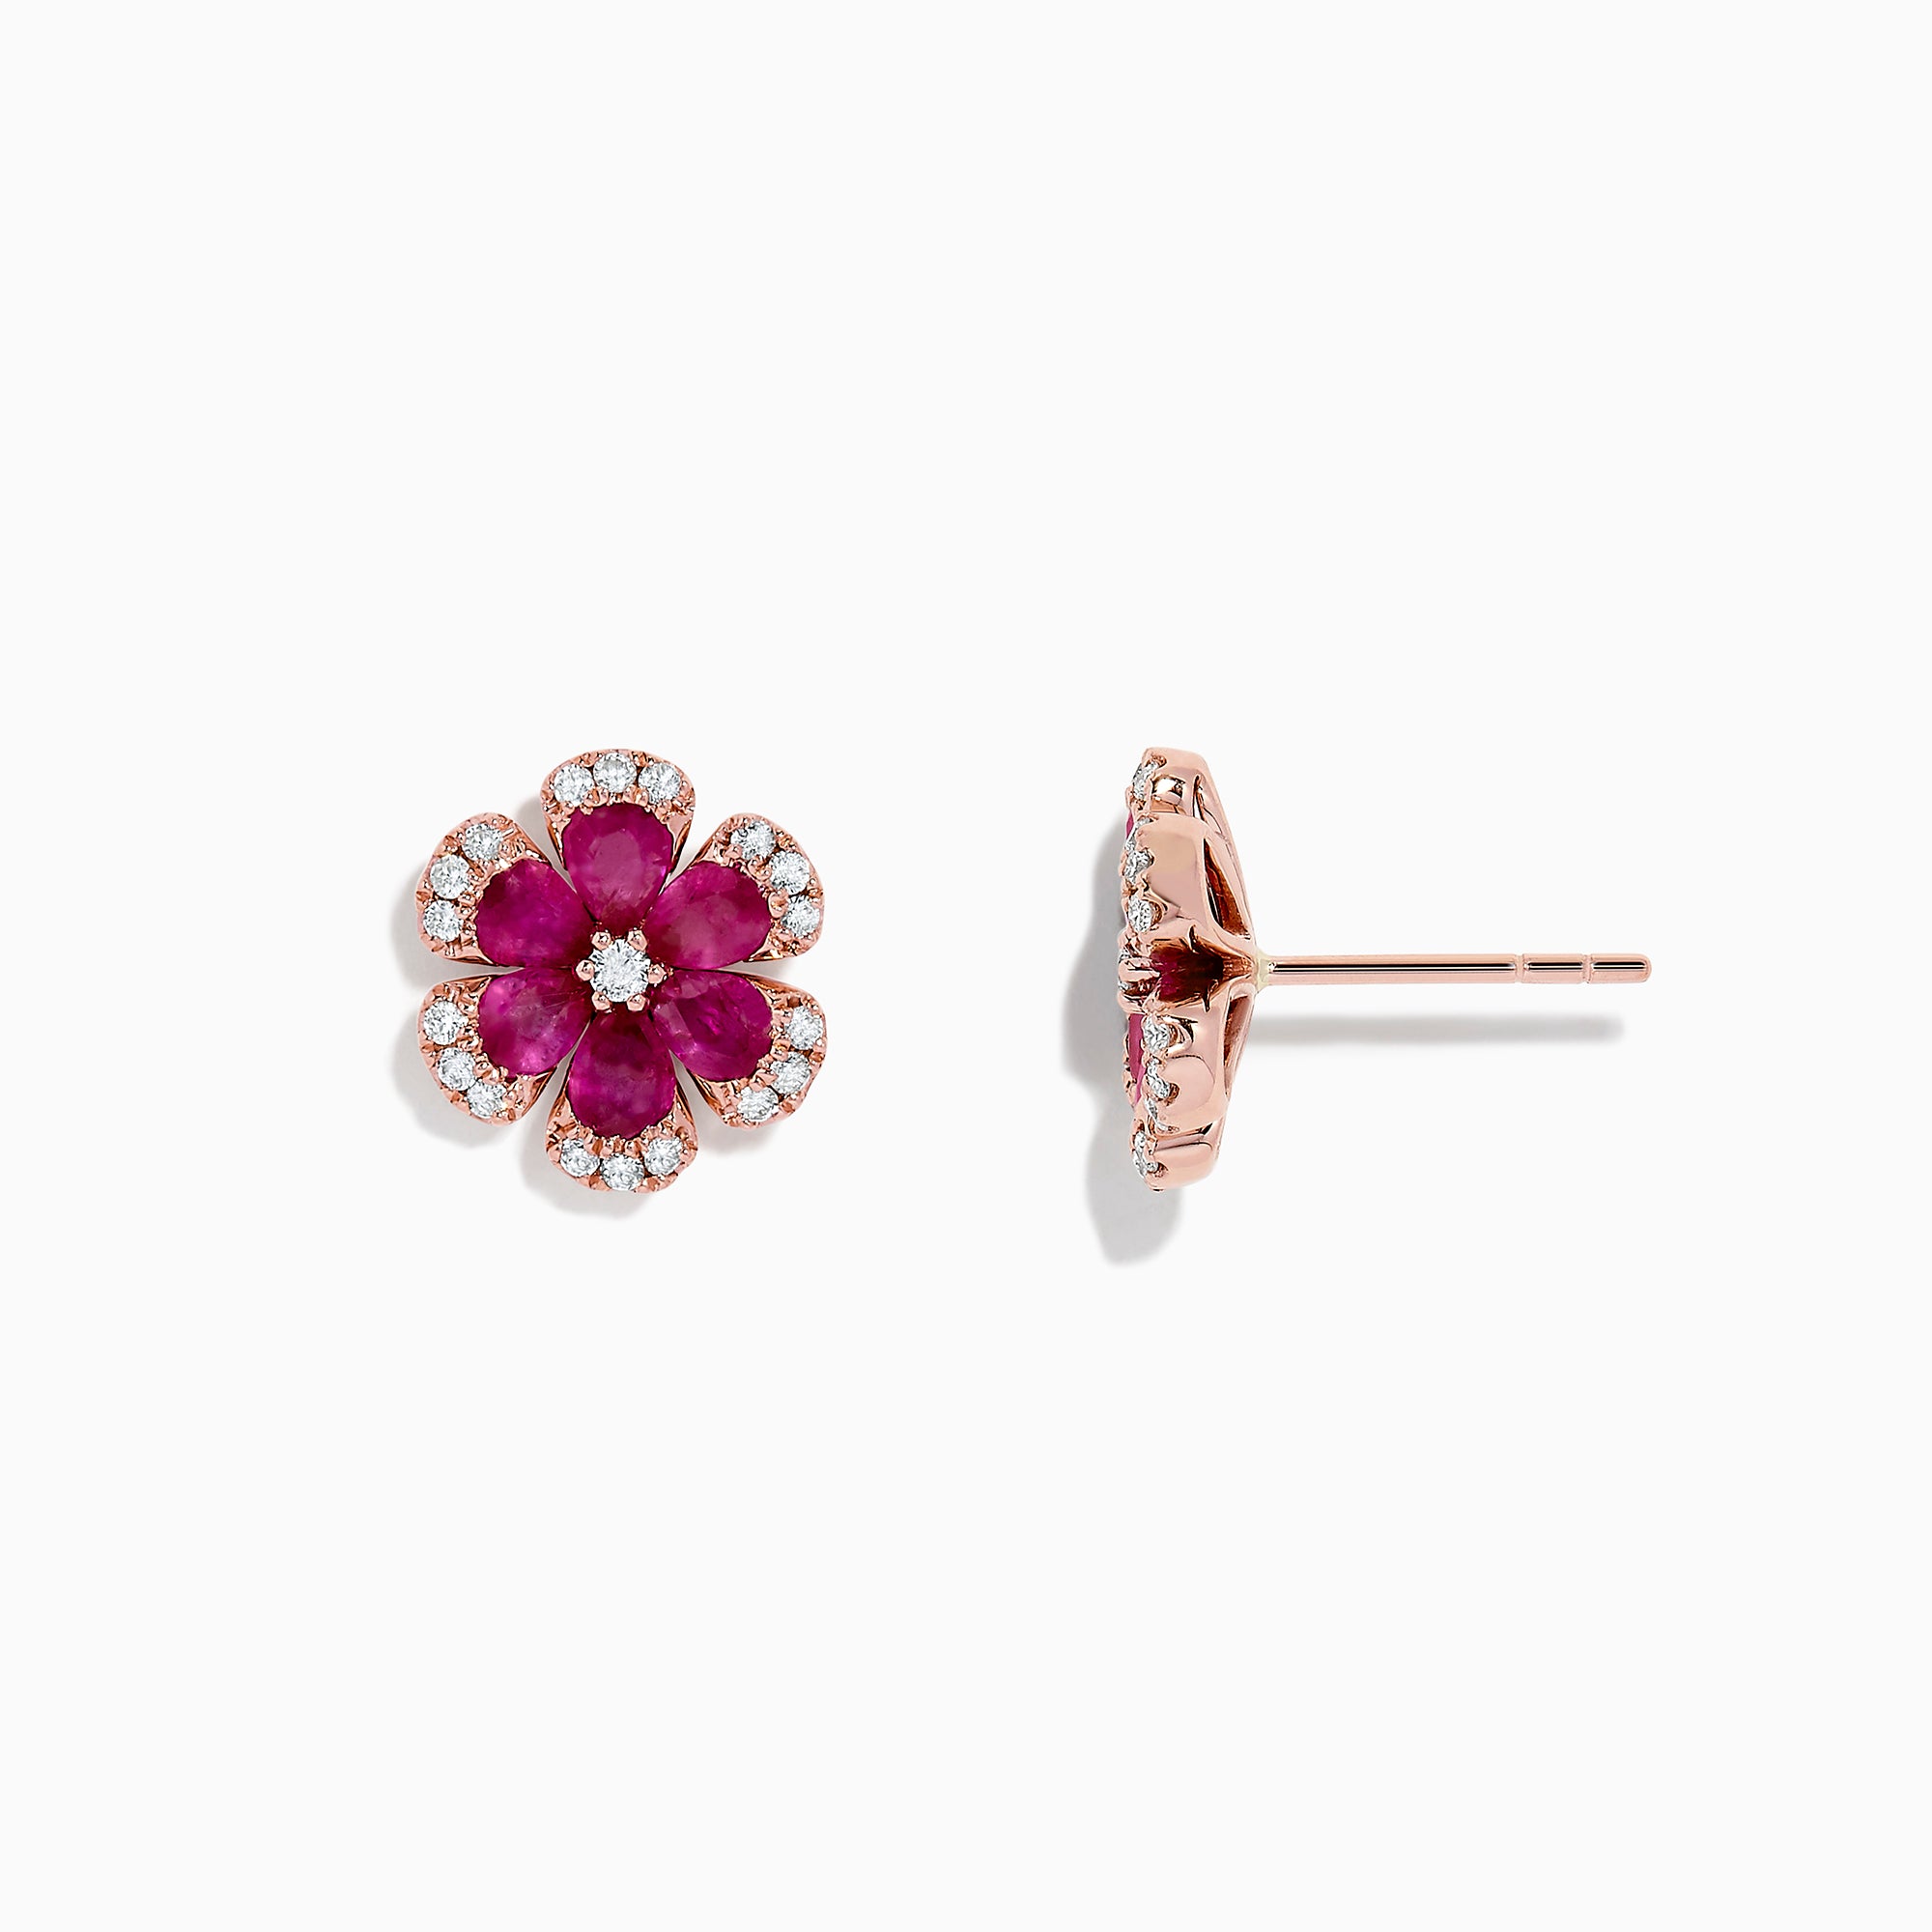 Effy Nature 14K Rose Gold Ruby and Diamond Flower Earrings, 2.28 TCW